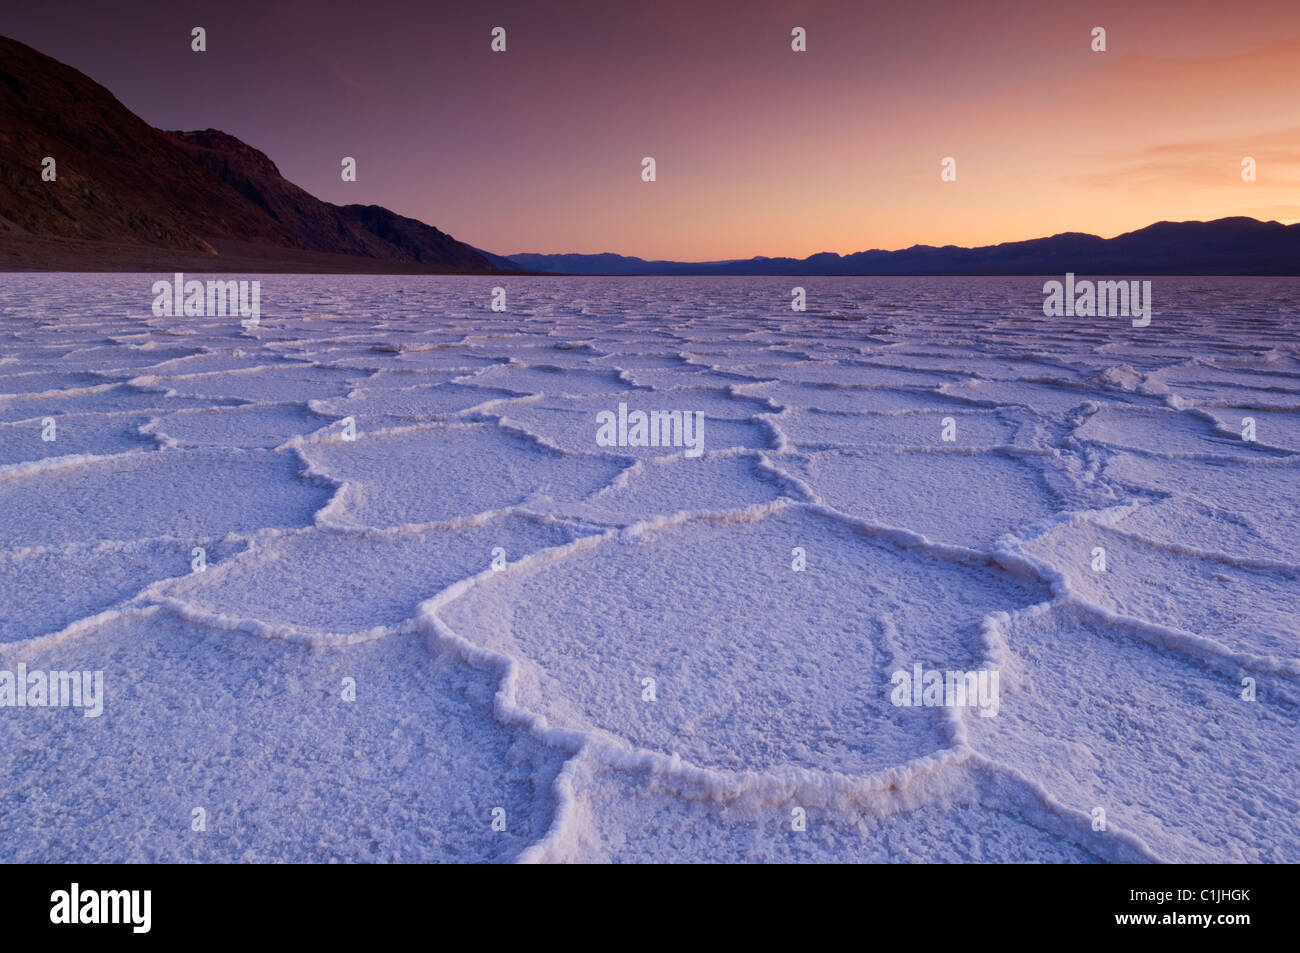 Death Valley National Park USA Badwater basin Death Valley Salt pan polygons at sunset Badwater Basin Death Valley National Park, California, USA Stock Photo